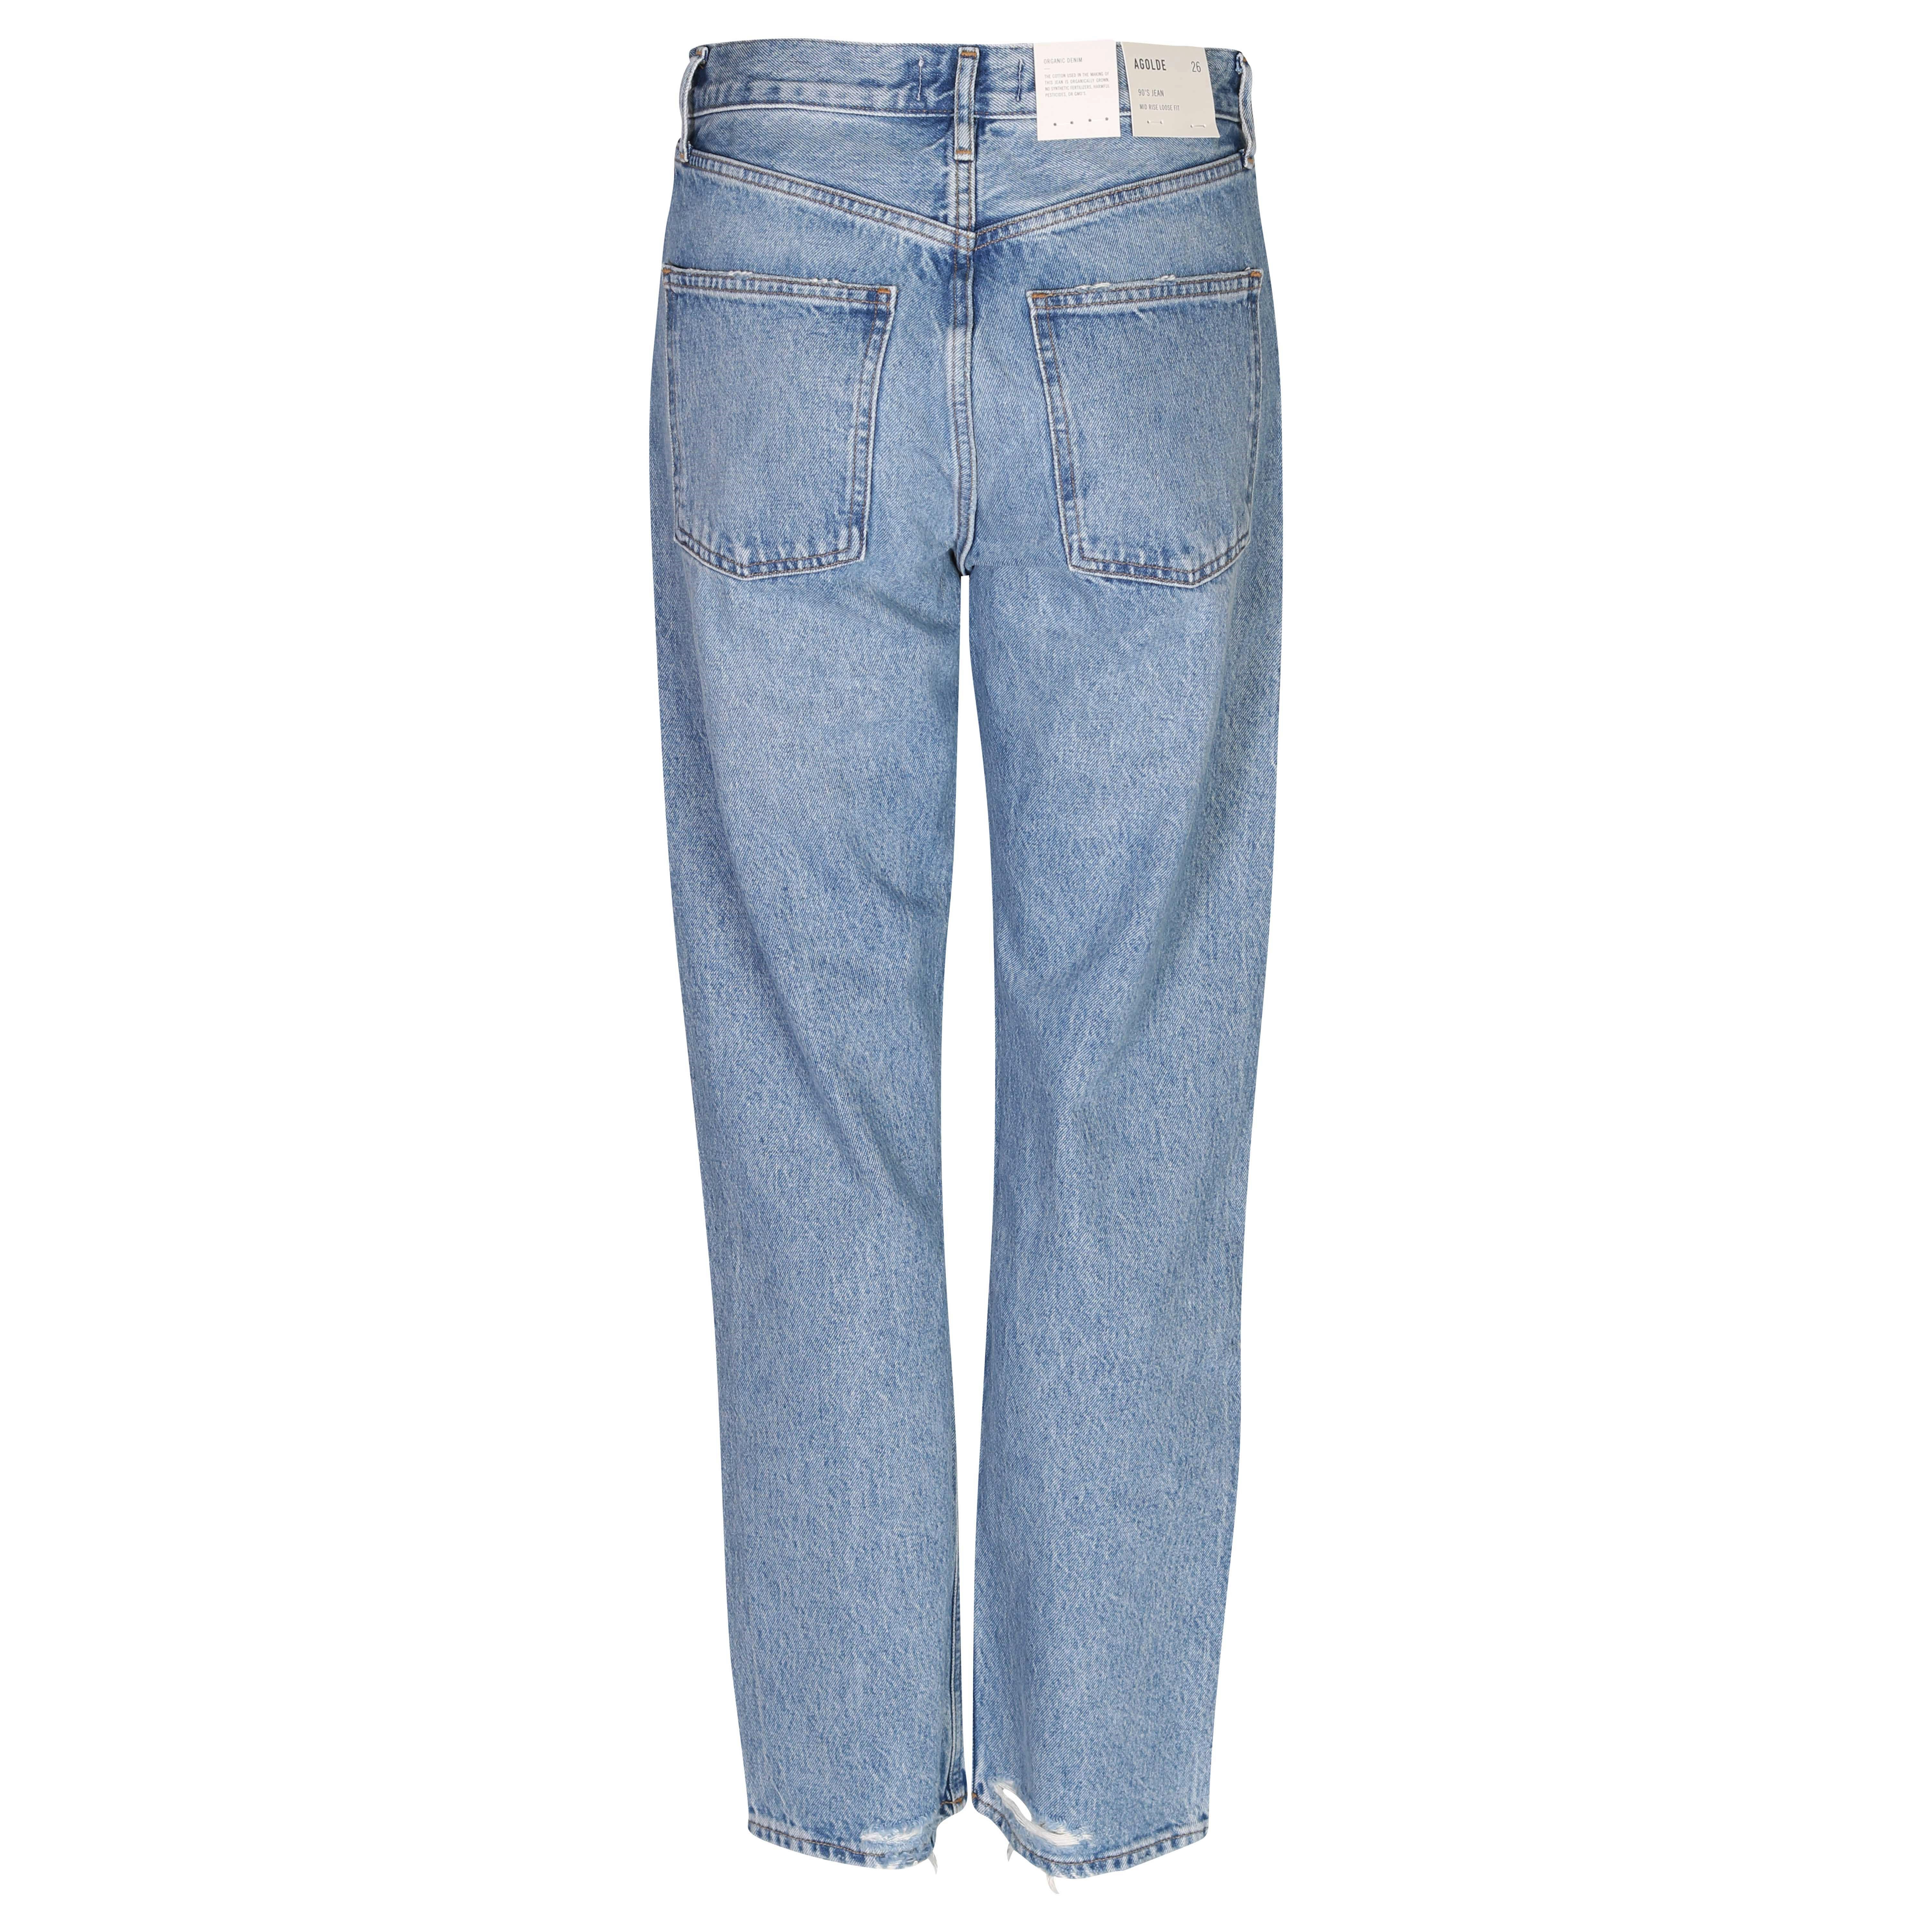 Agolde Jeans 90s Cropped in Scheme Washing W 27